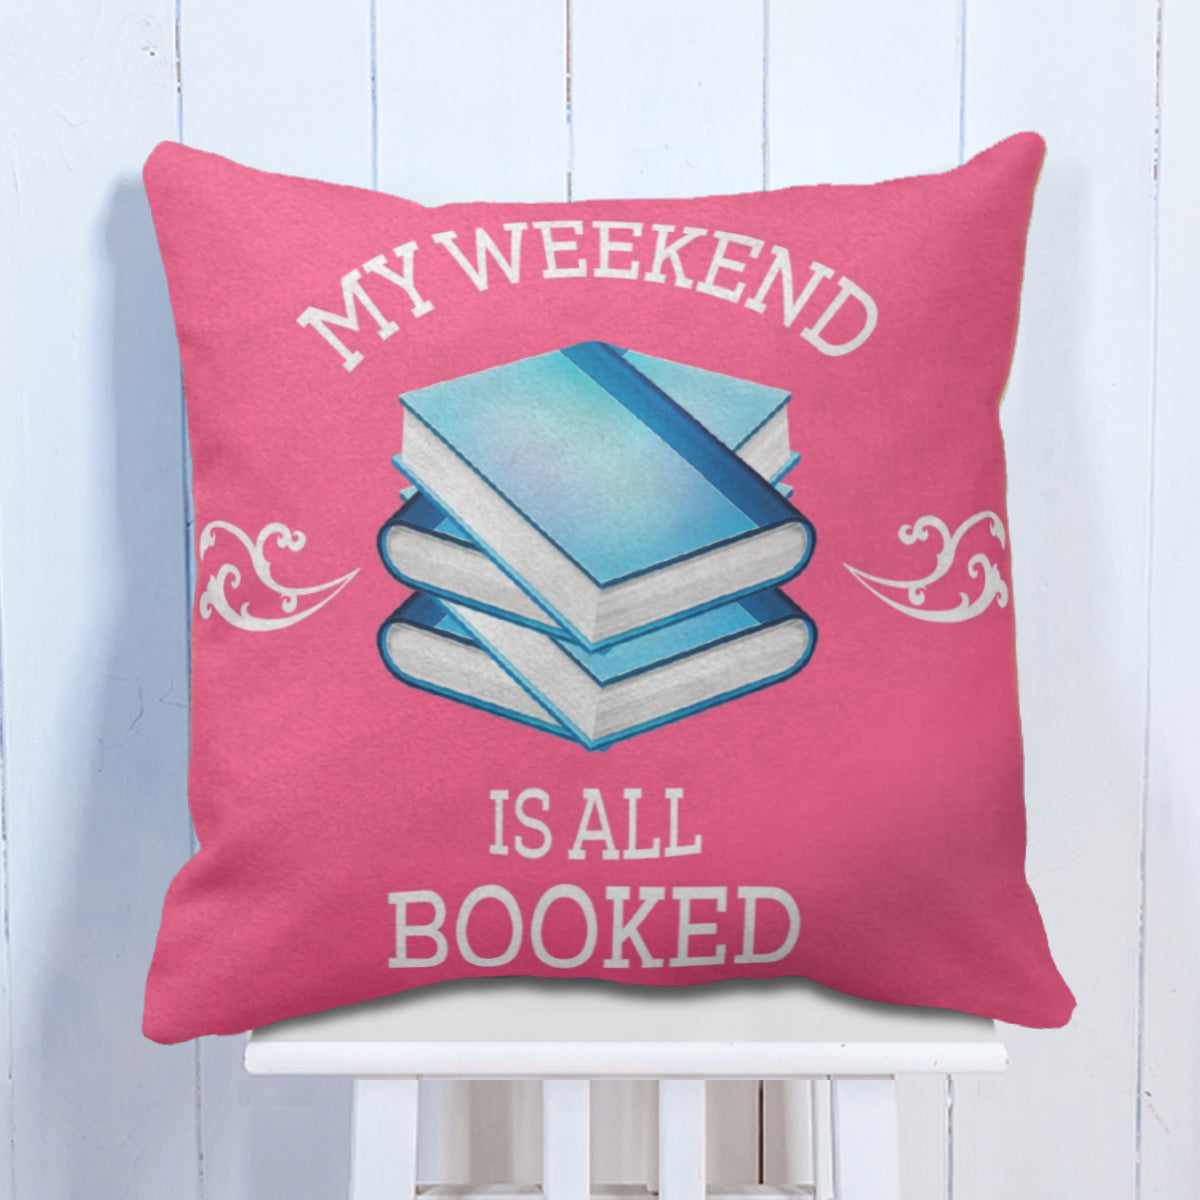 My Weekends Are All Booked Cushion